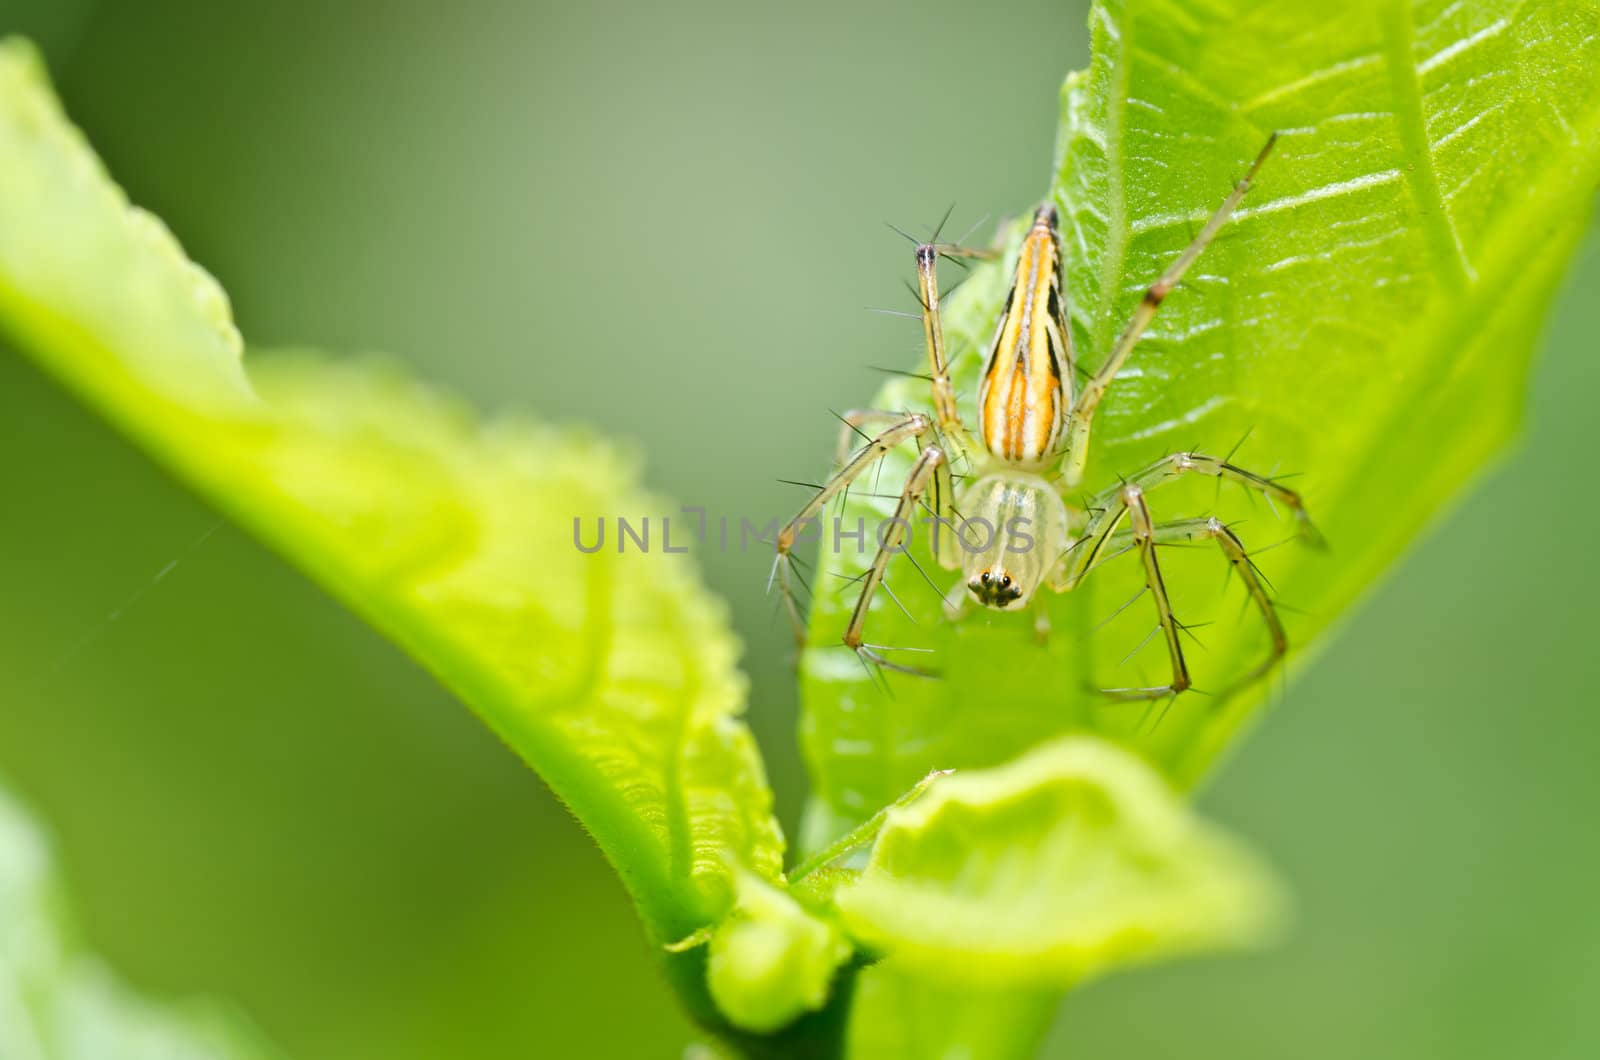 long legs spider in green nature or the garden